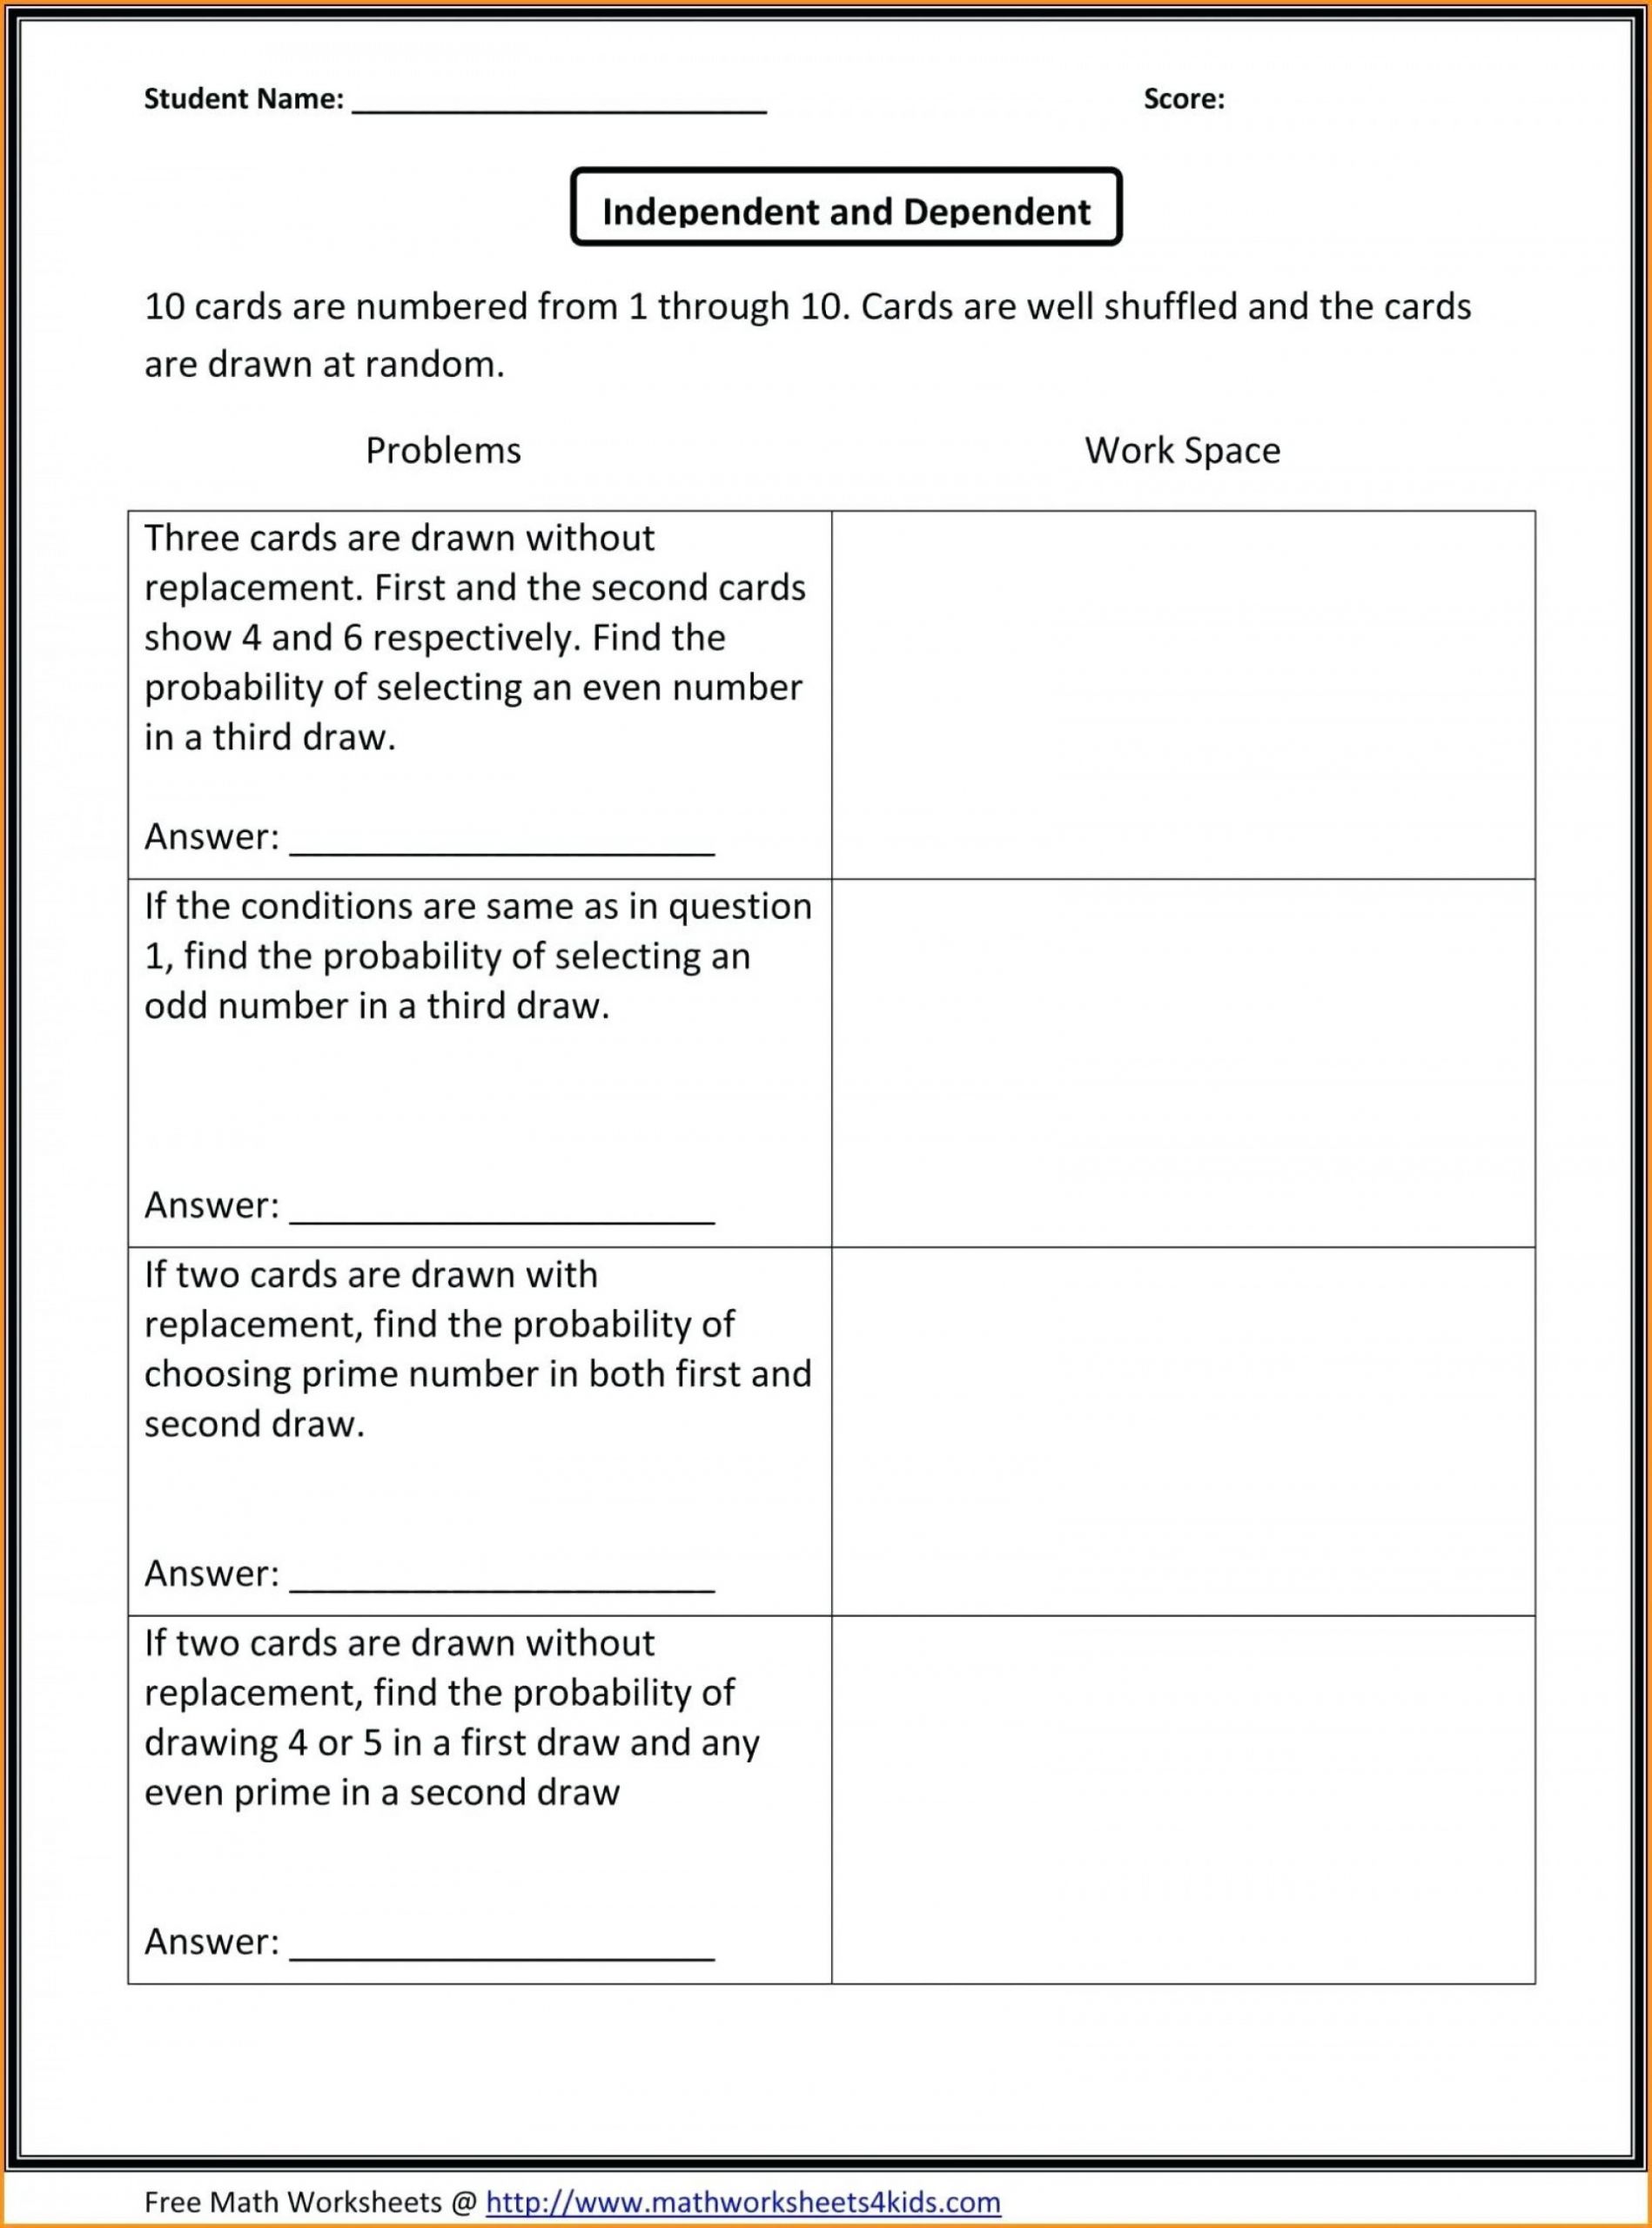 Free Math Worksheets Second Grade 2 Counting Money Canadian Money Words to Number